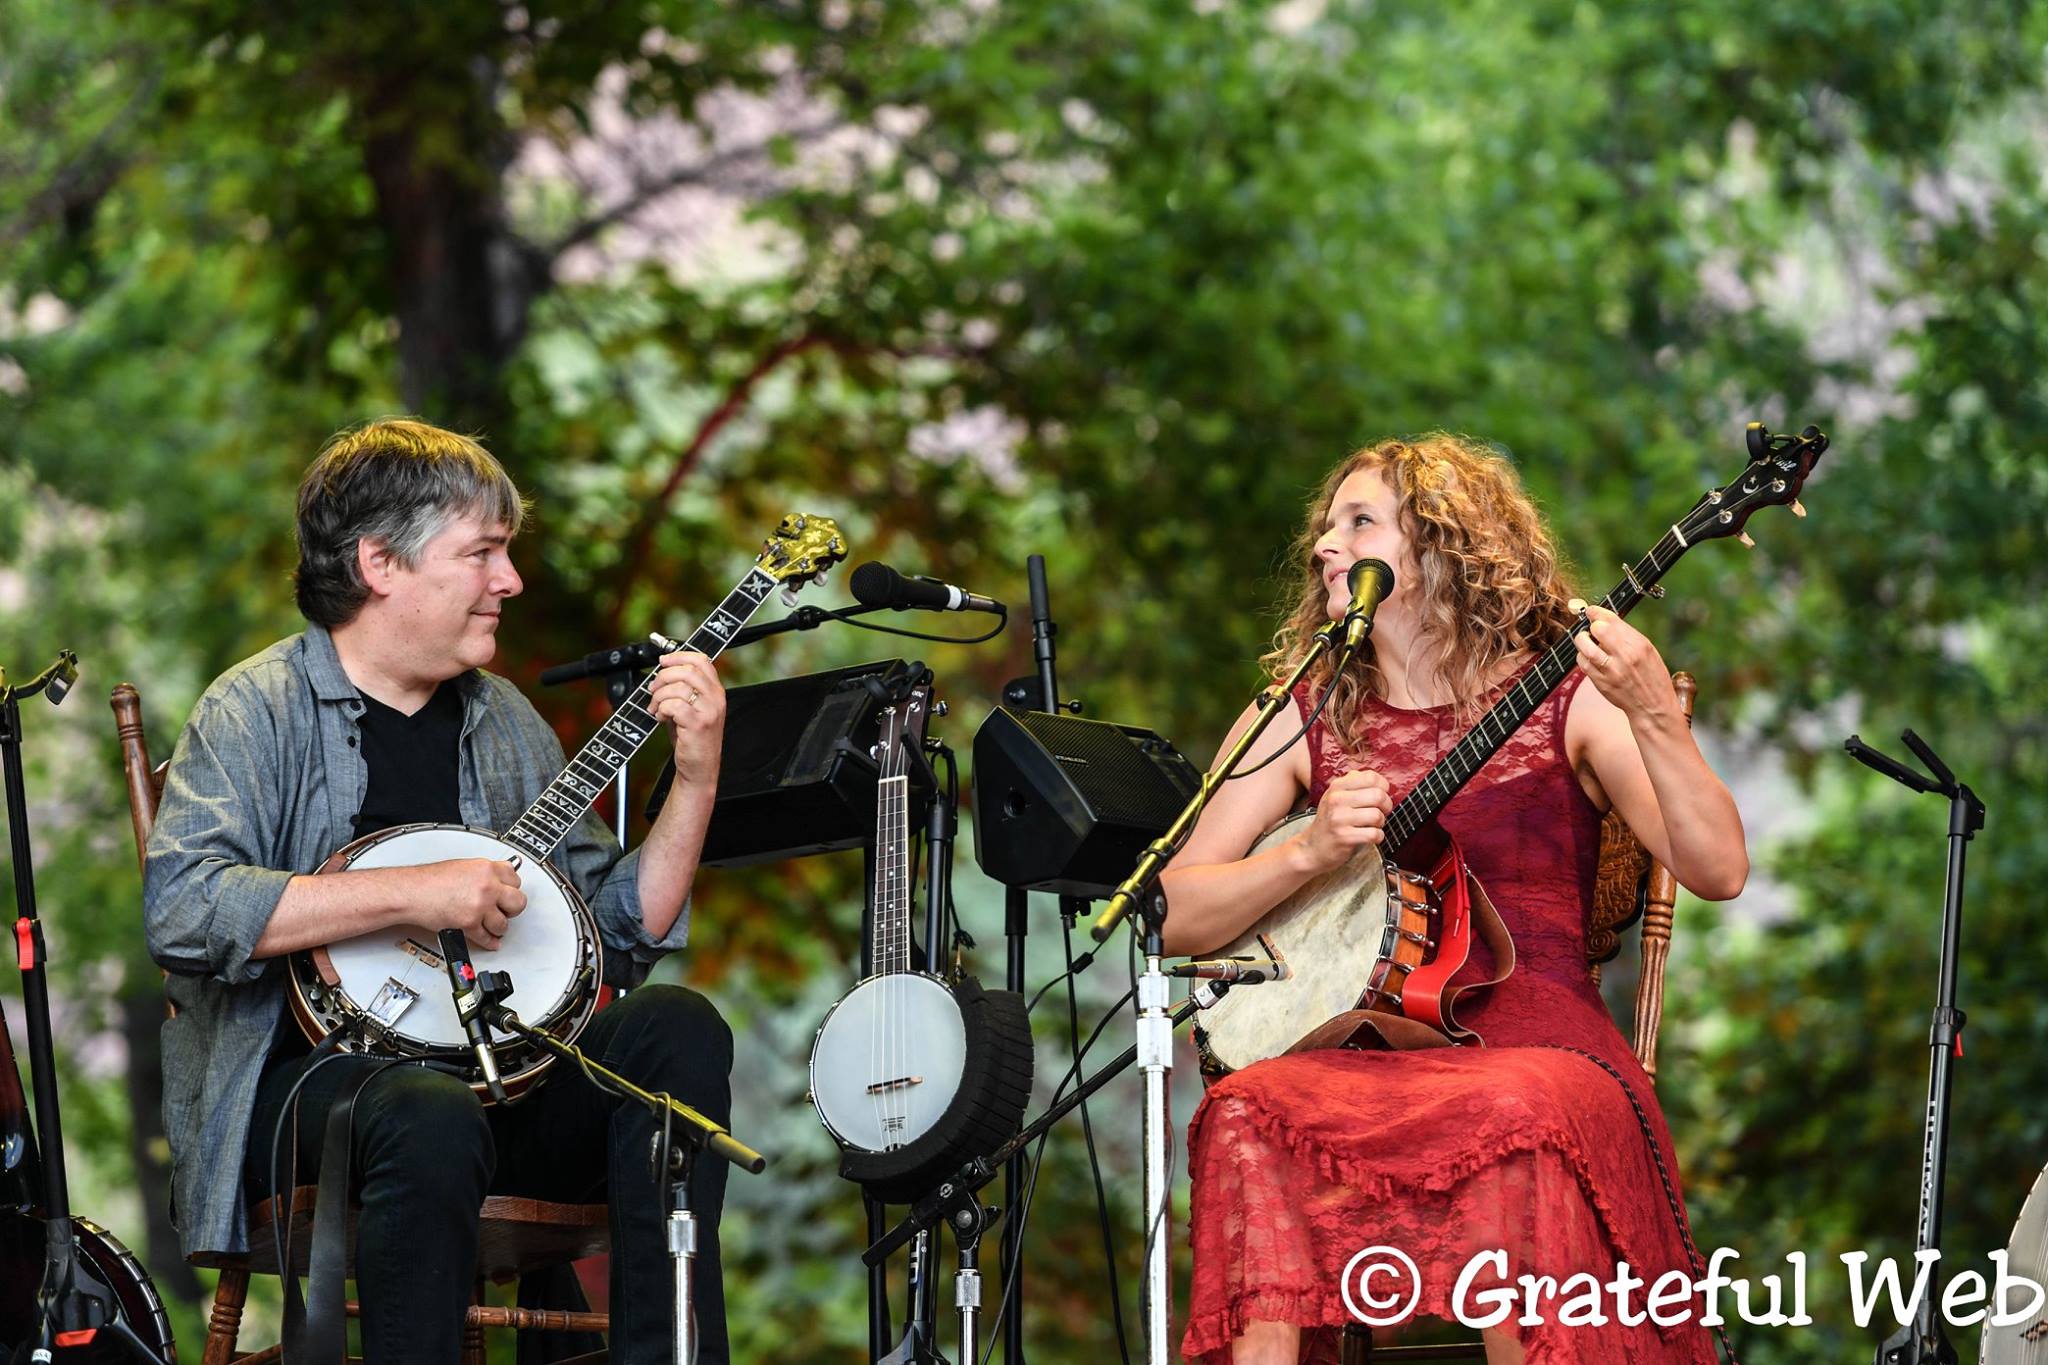 Hollywood Arts Park Experience Final Concert for season to feature Béla Fleck and Abigail Washburn